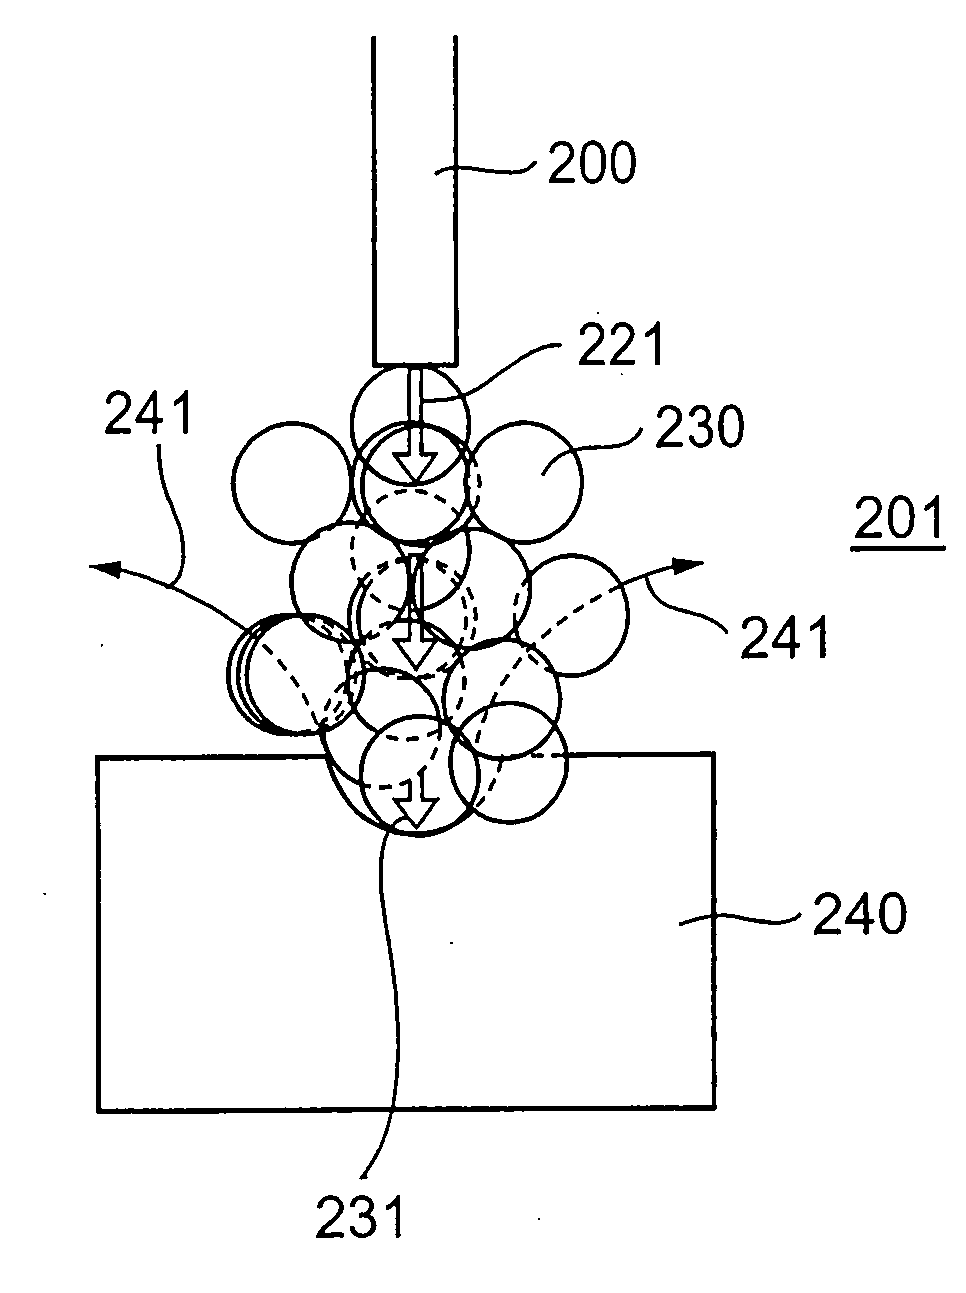 Method and device for excavating submerged stratum